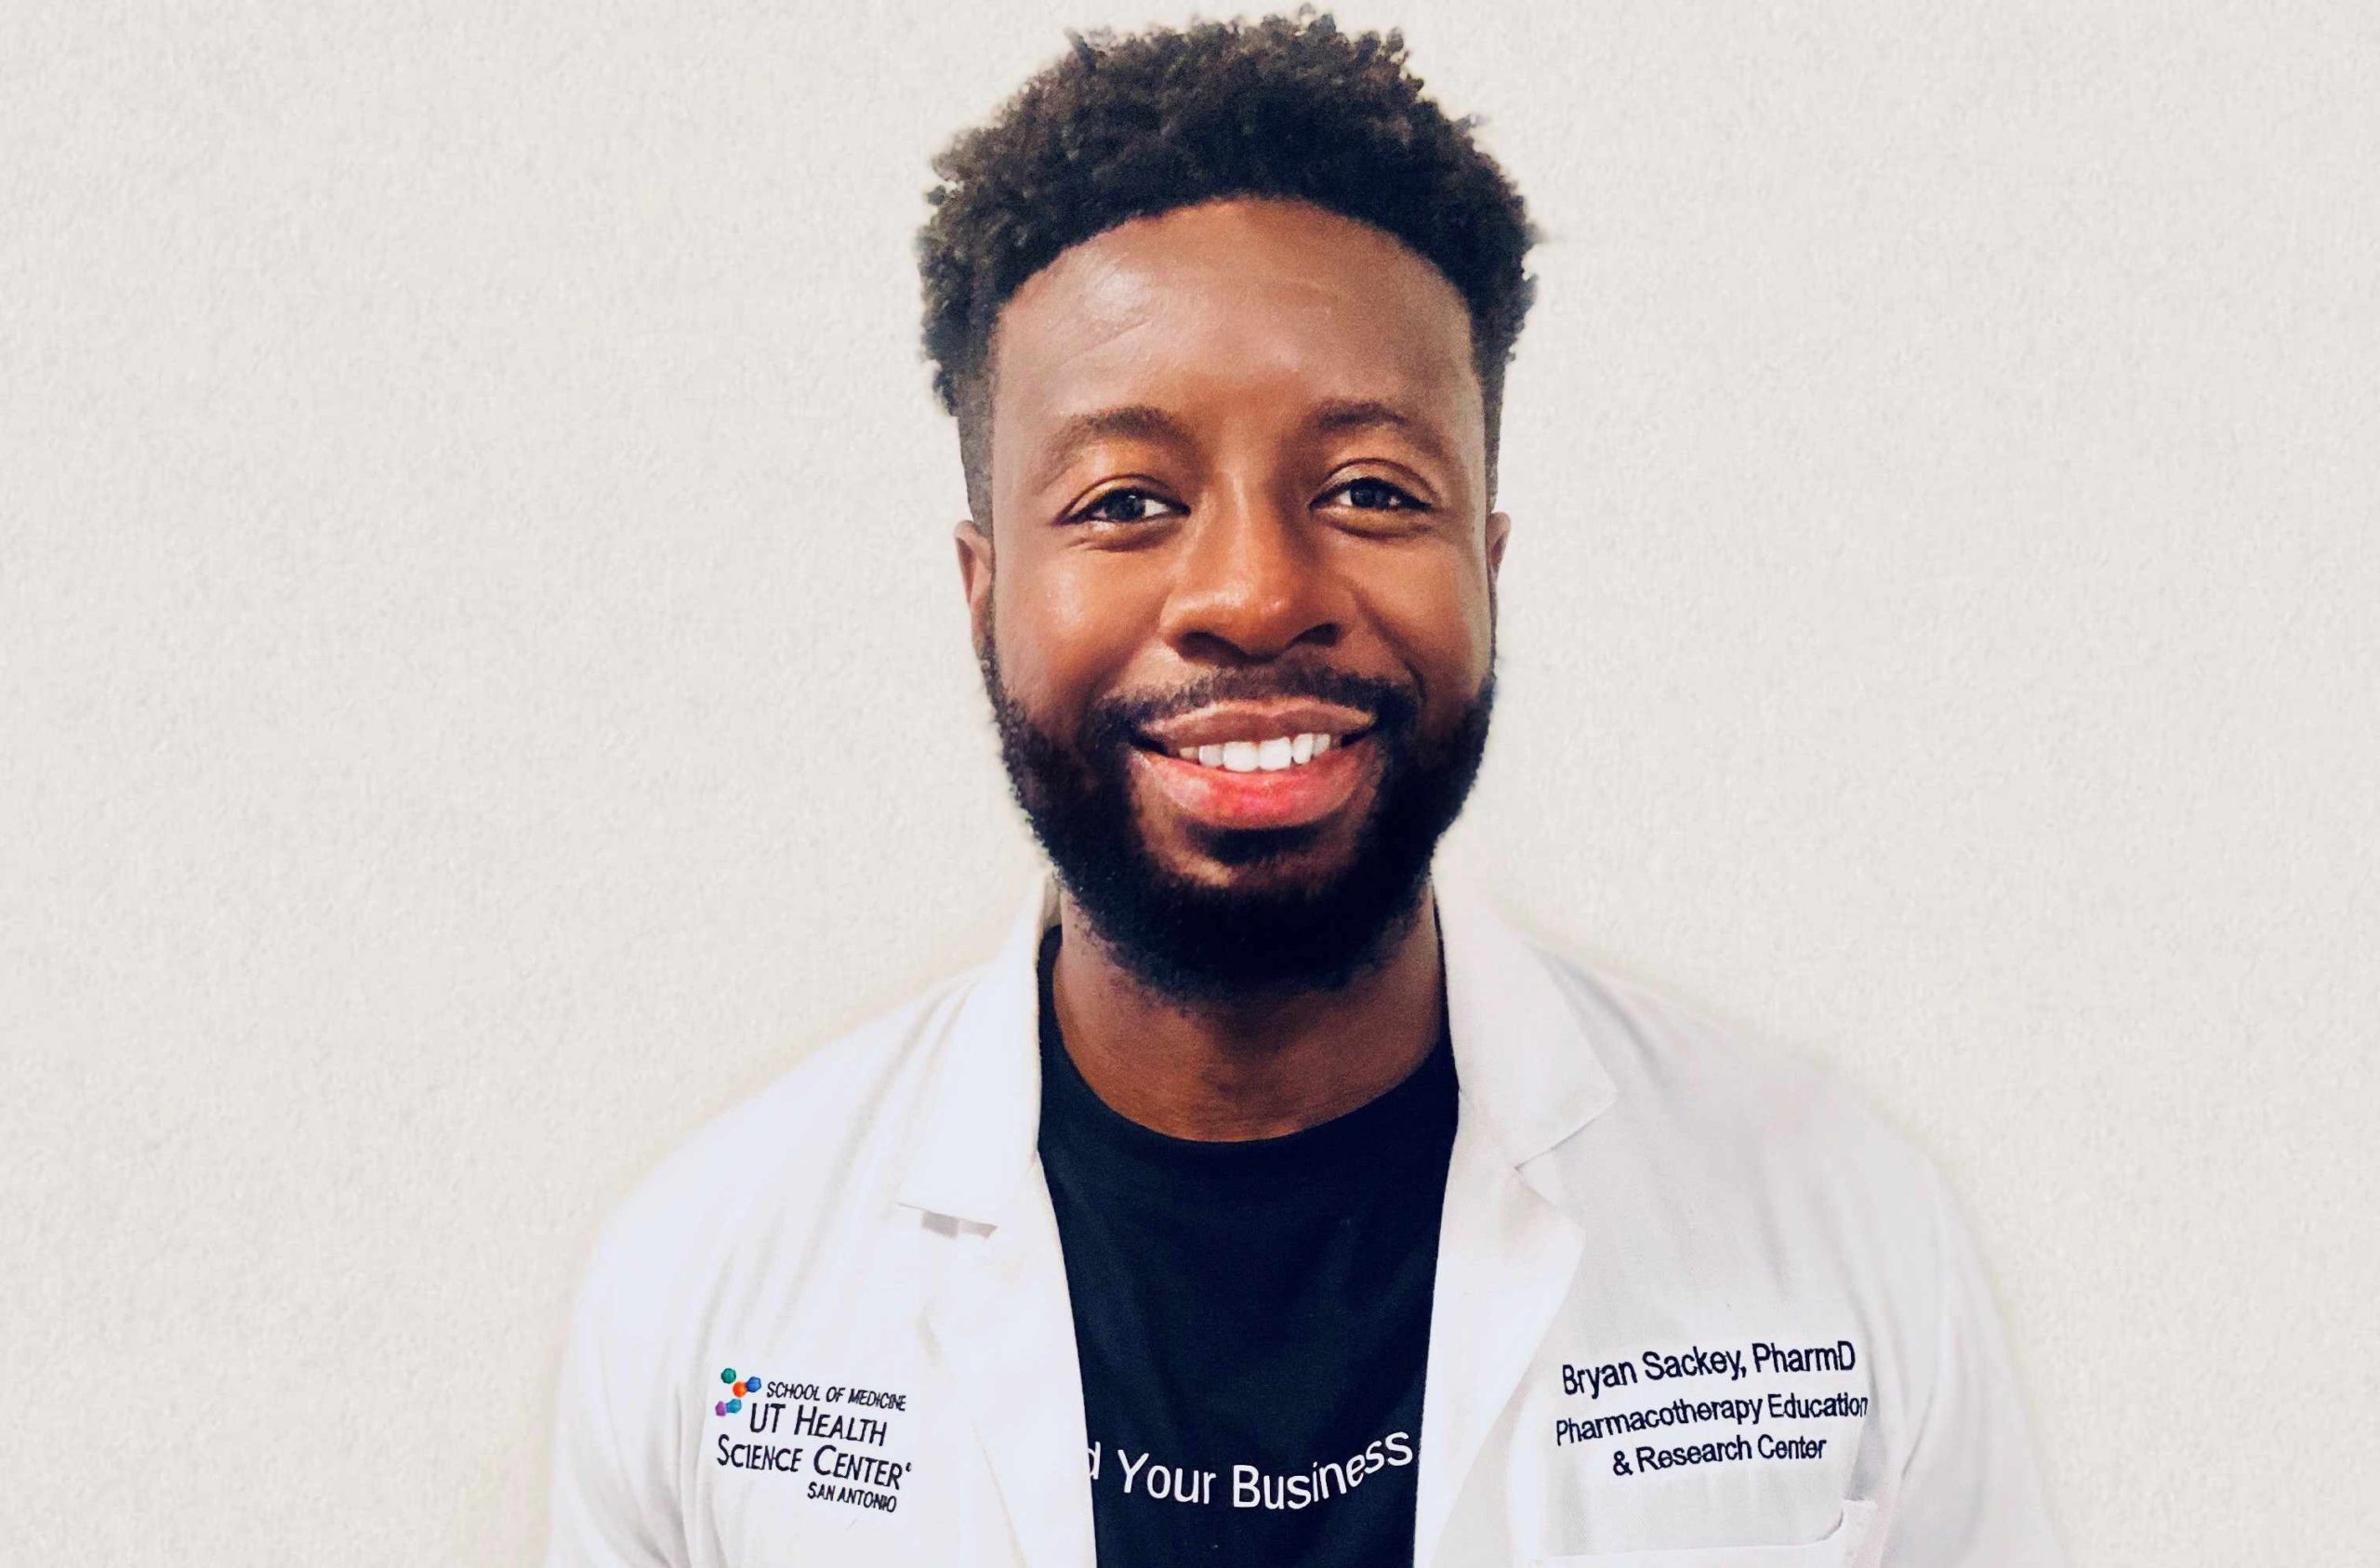 Meet Dr. Bryan Sackey: Founder and President of Pharmacy Initiative LeaderS (PILs)